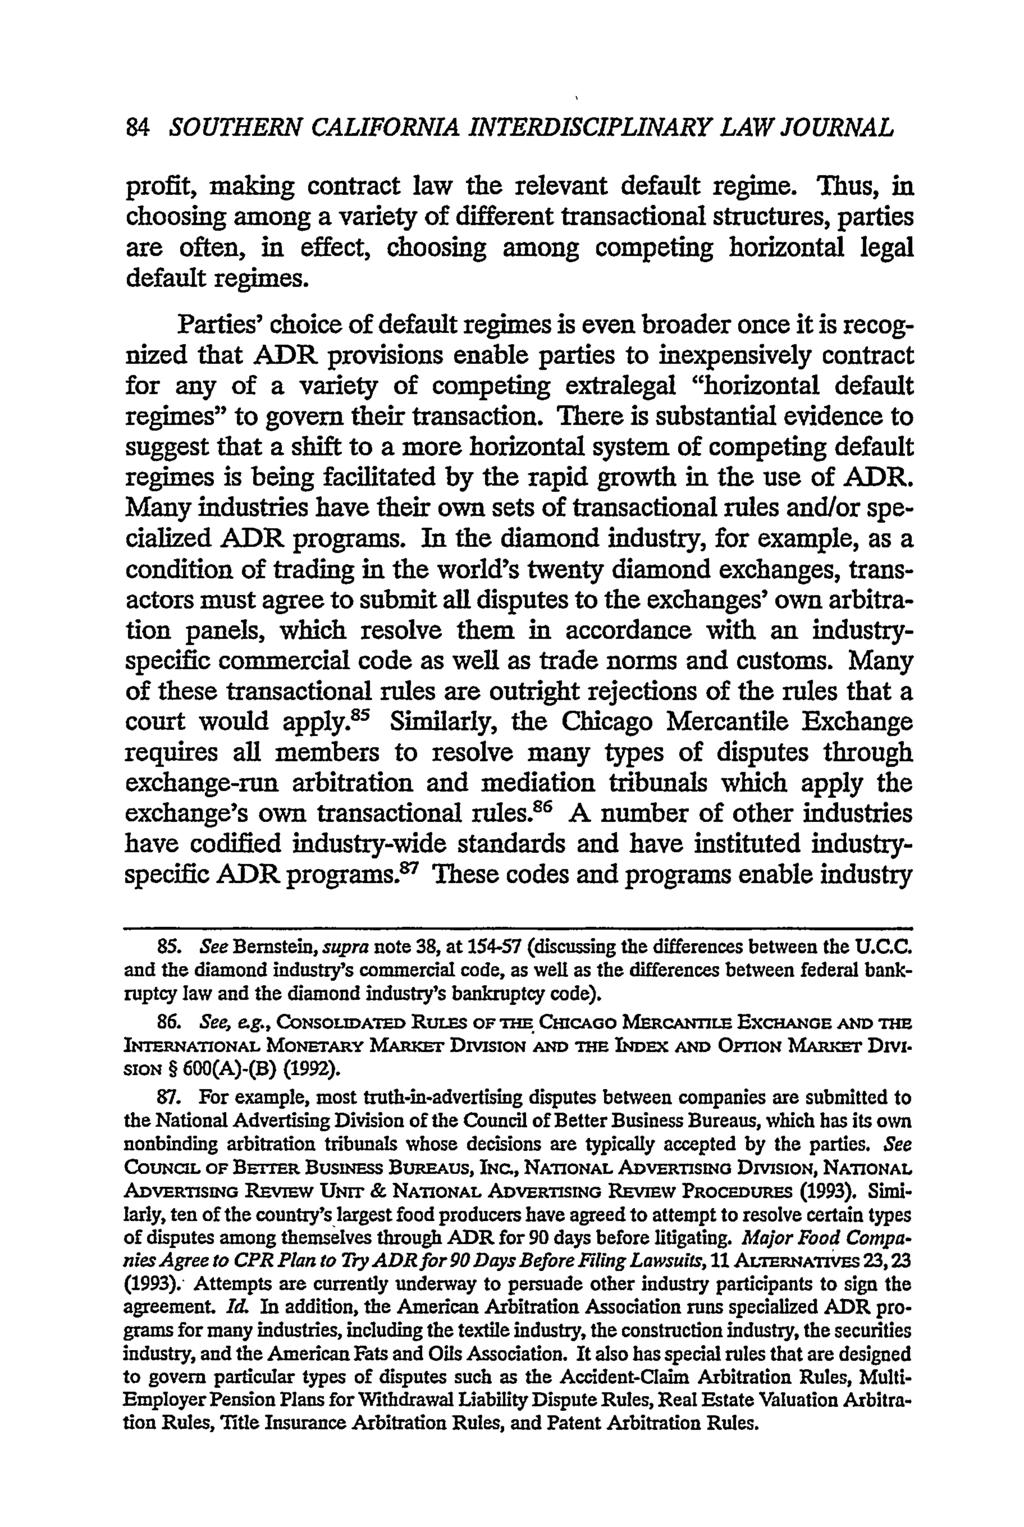 84 SOUTHERN CALIFORNIA INTERDISCIPLINARY LAW JOURNAL profit, making contract law the relevant default regime.